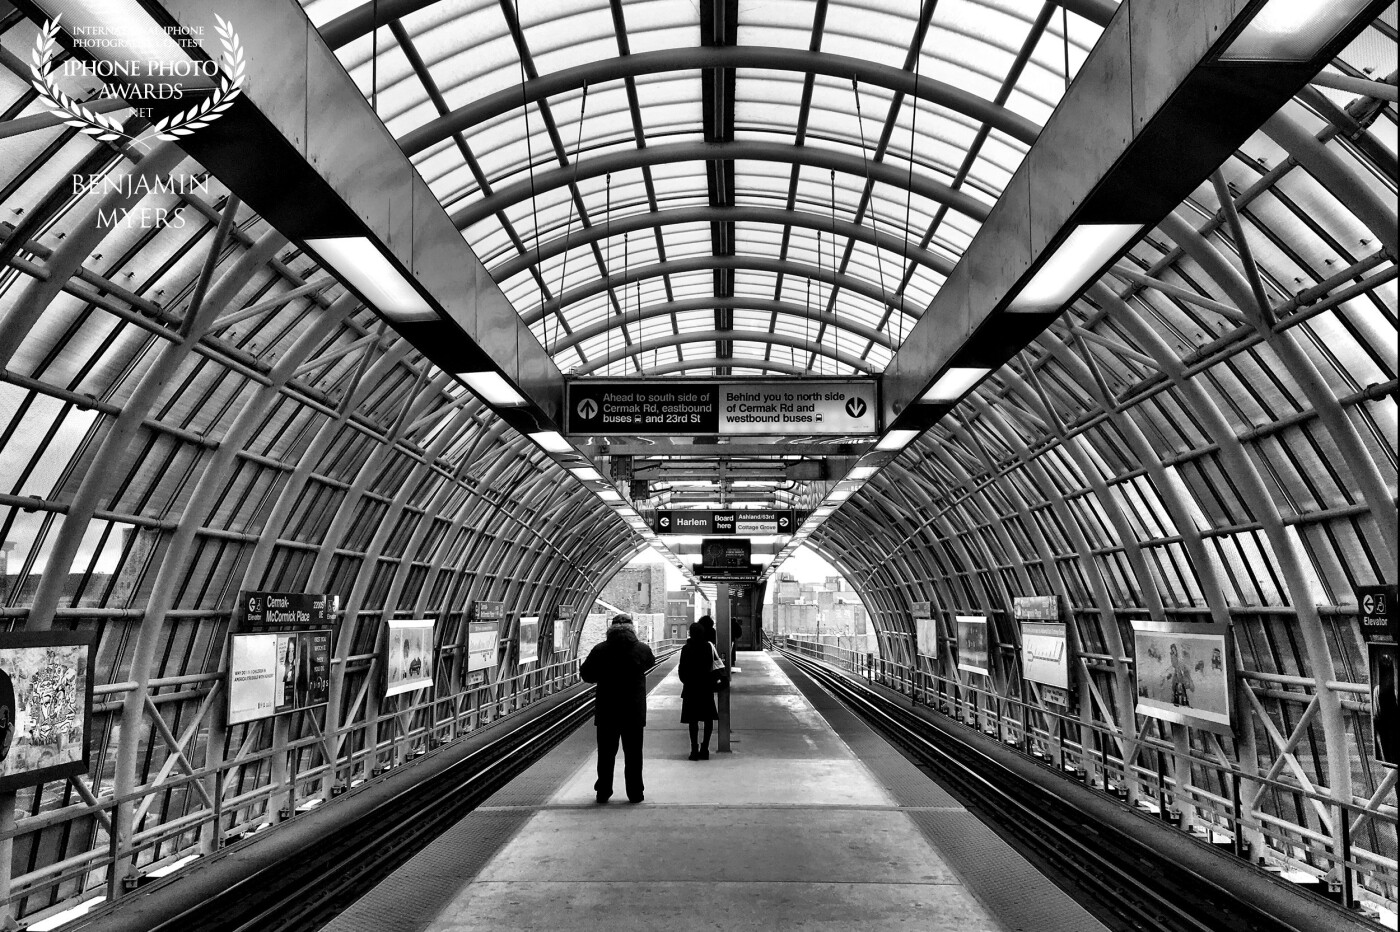 Chicago is a playground for photographers. Everywhere you look there are opportunities to capture amazing architecture, skylines, and people. This shot was taken while waiting for the L train to make a day of wandering aimlessly in the heart of the city.  